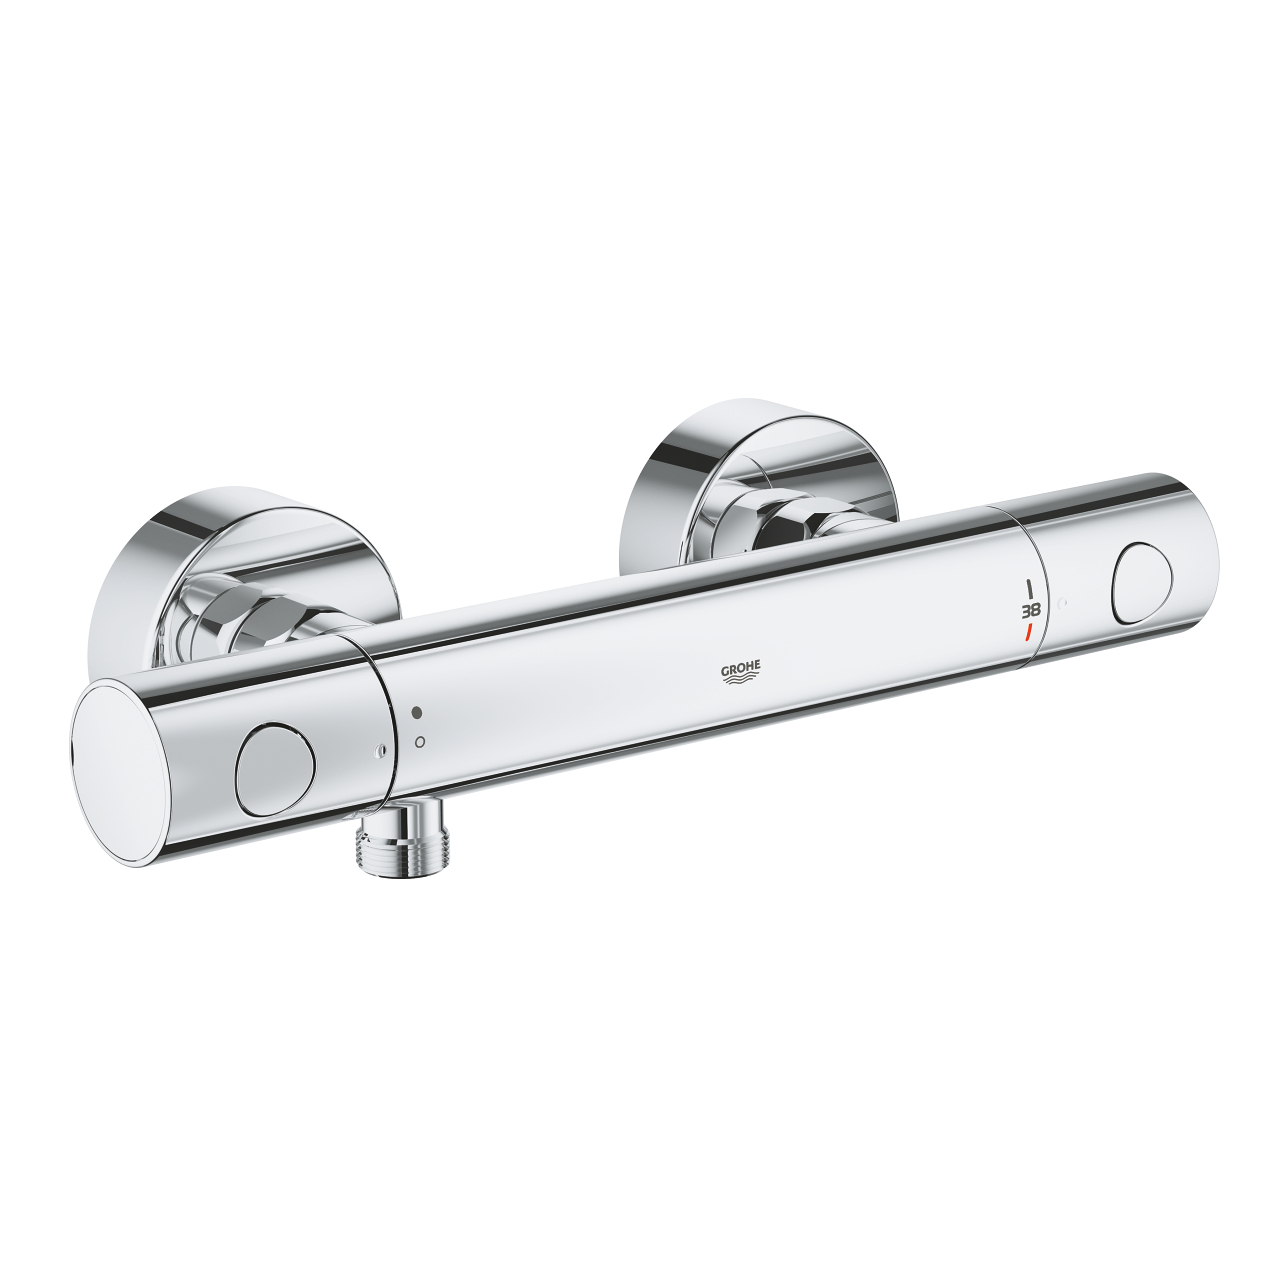 Baterie dus termostatata Grohe Precision Get crom baie